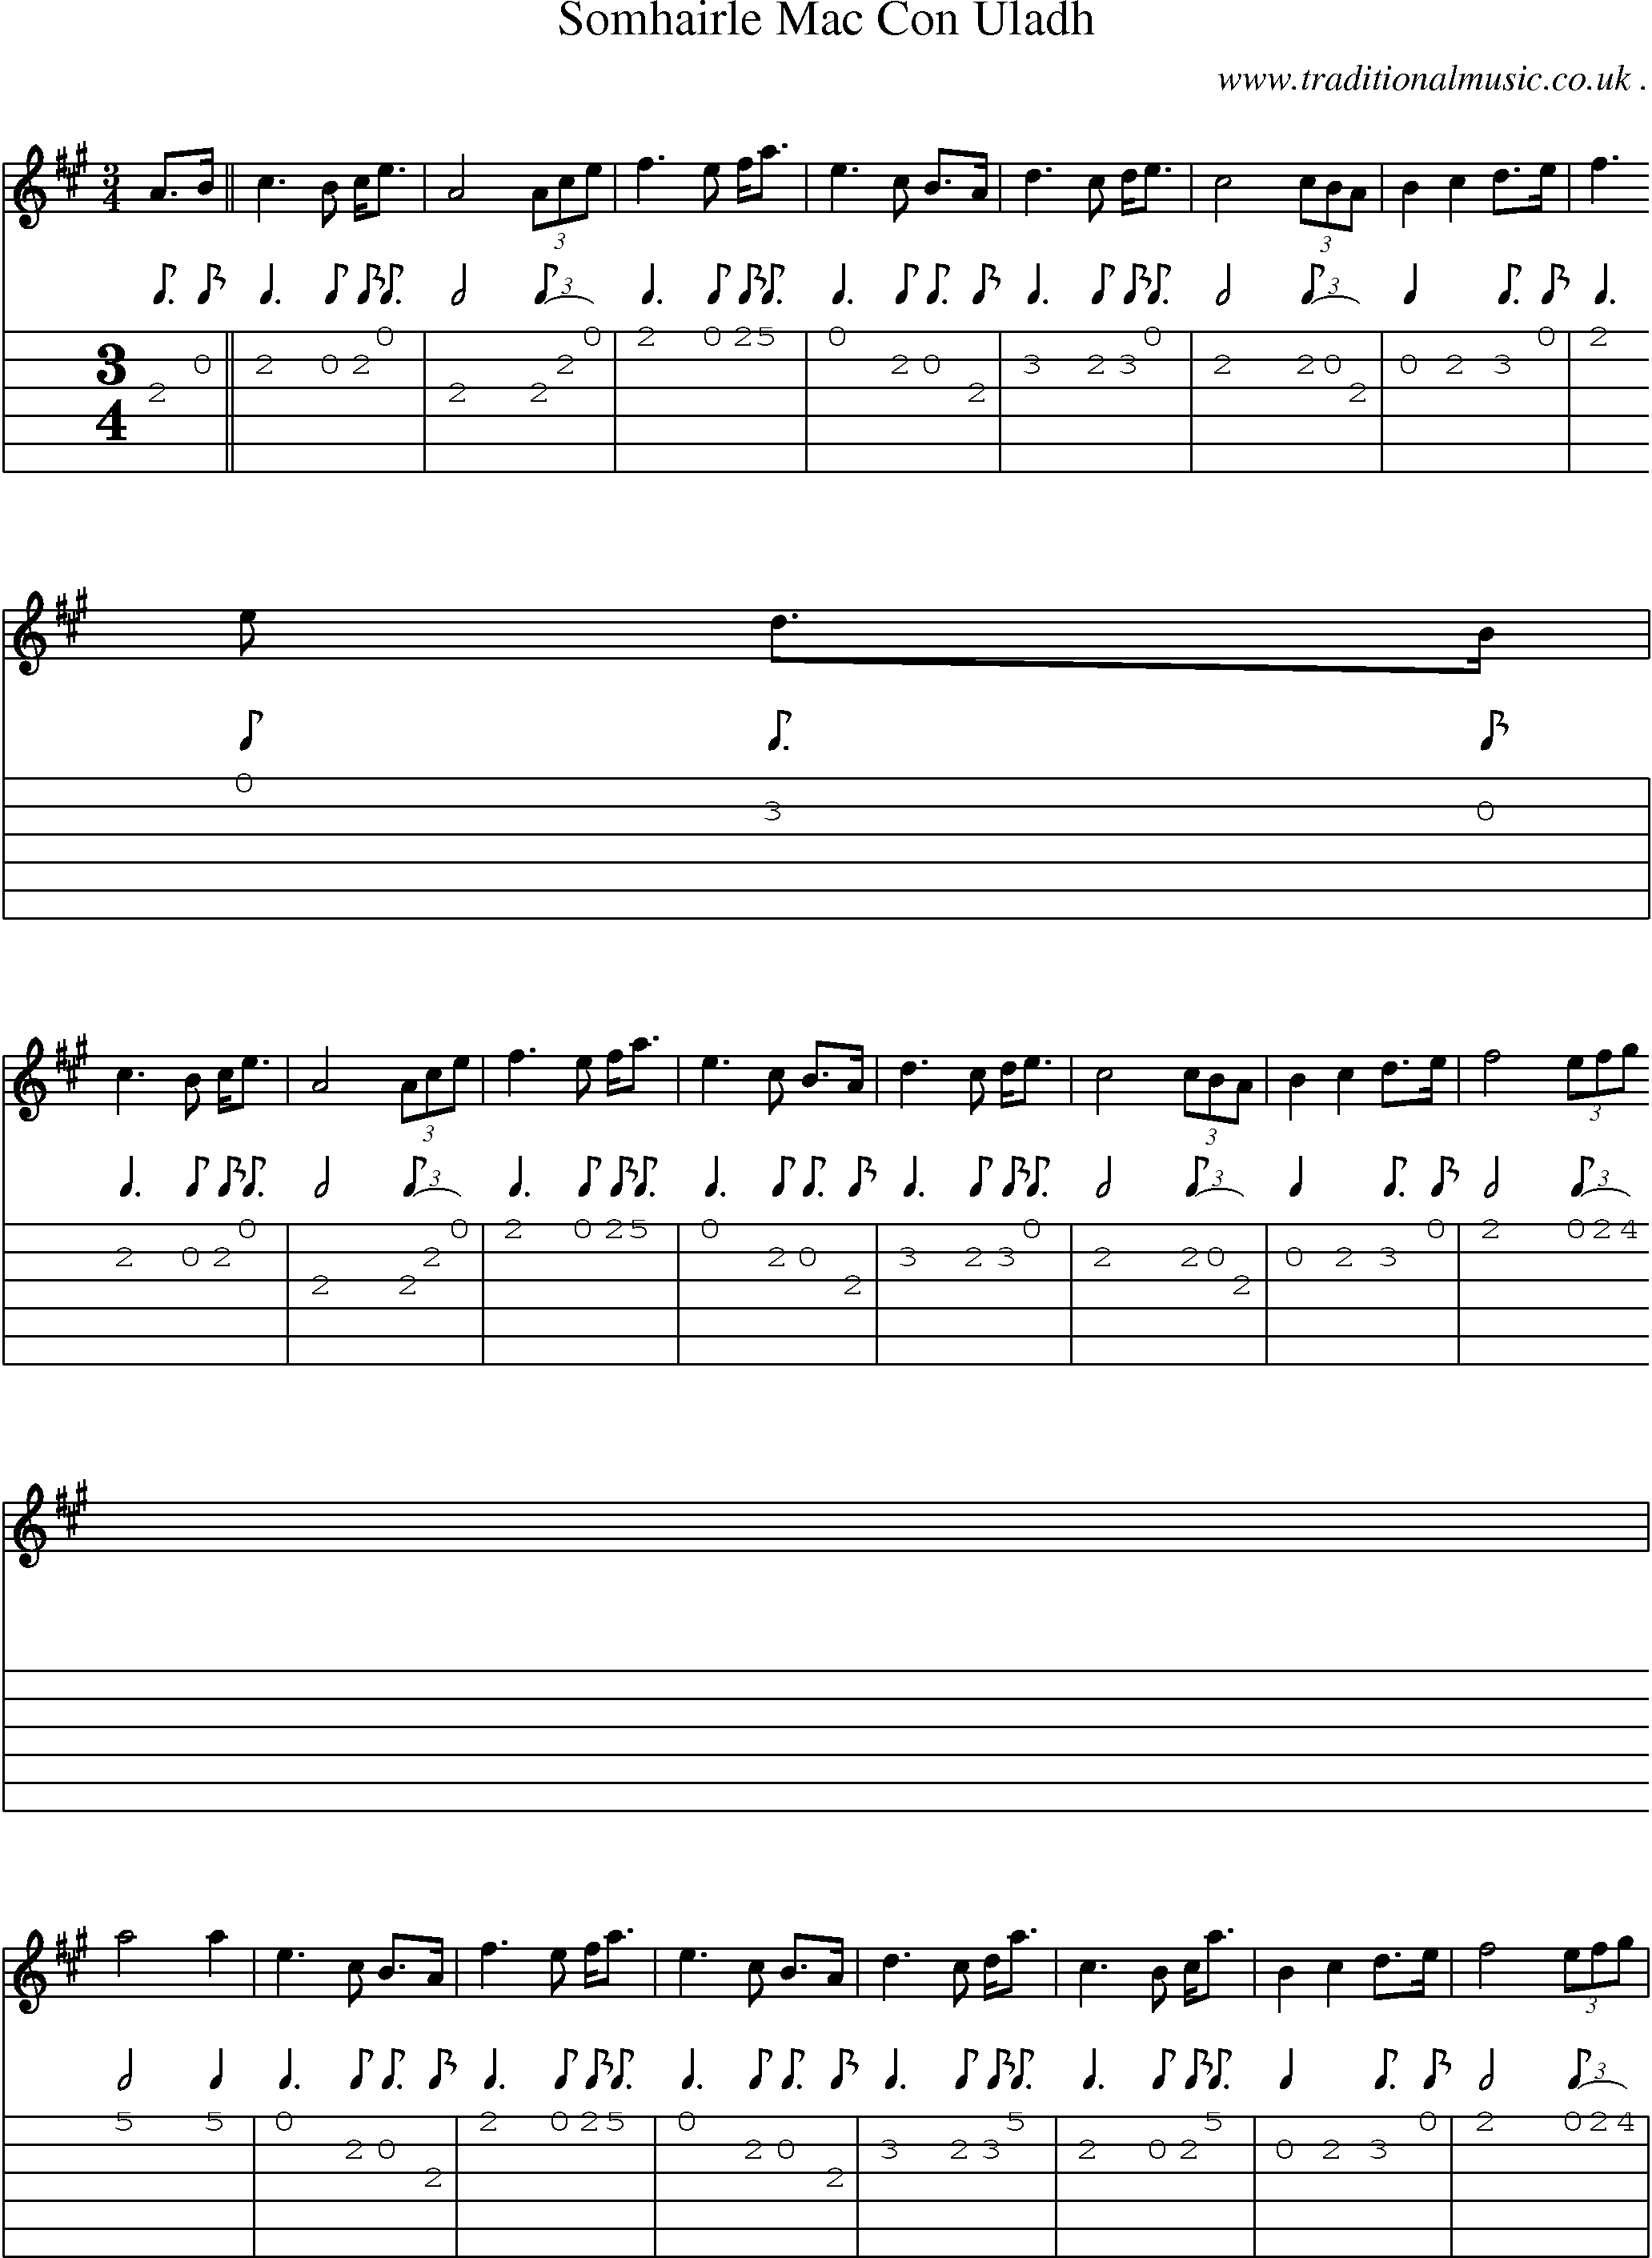 Sheet-Music and Guitar Tabs for Somhairle Mac Con Uladh